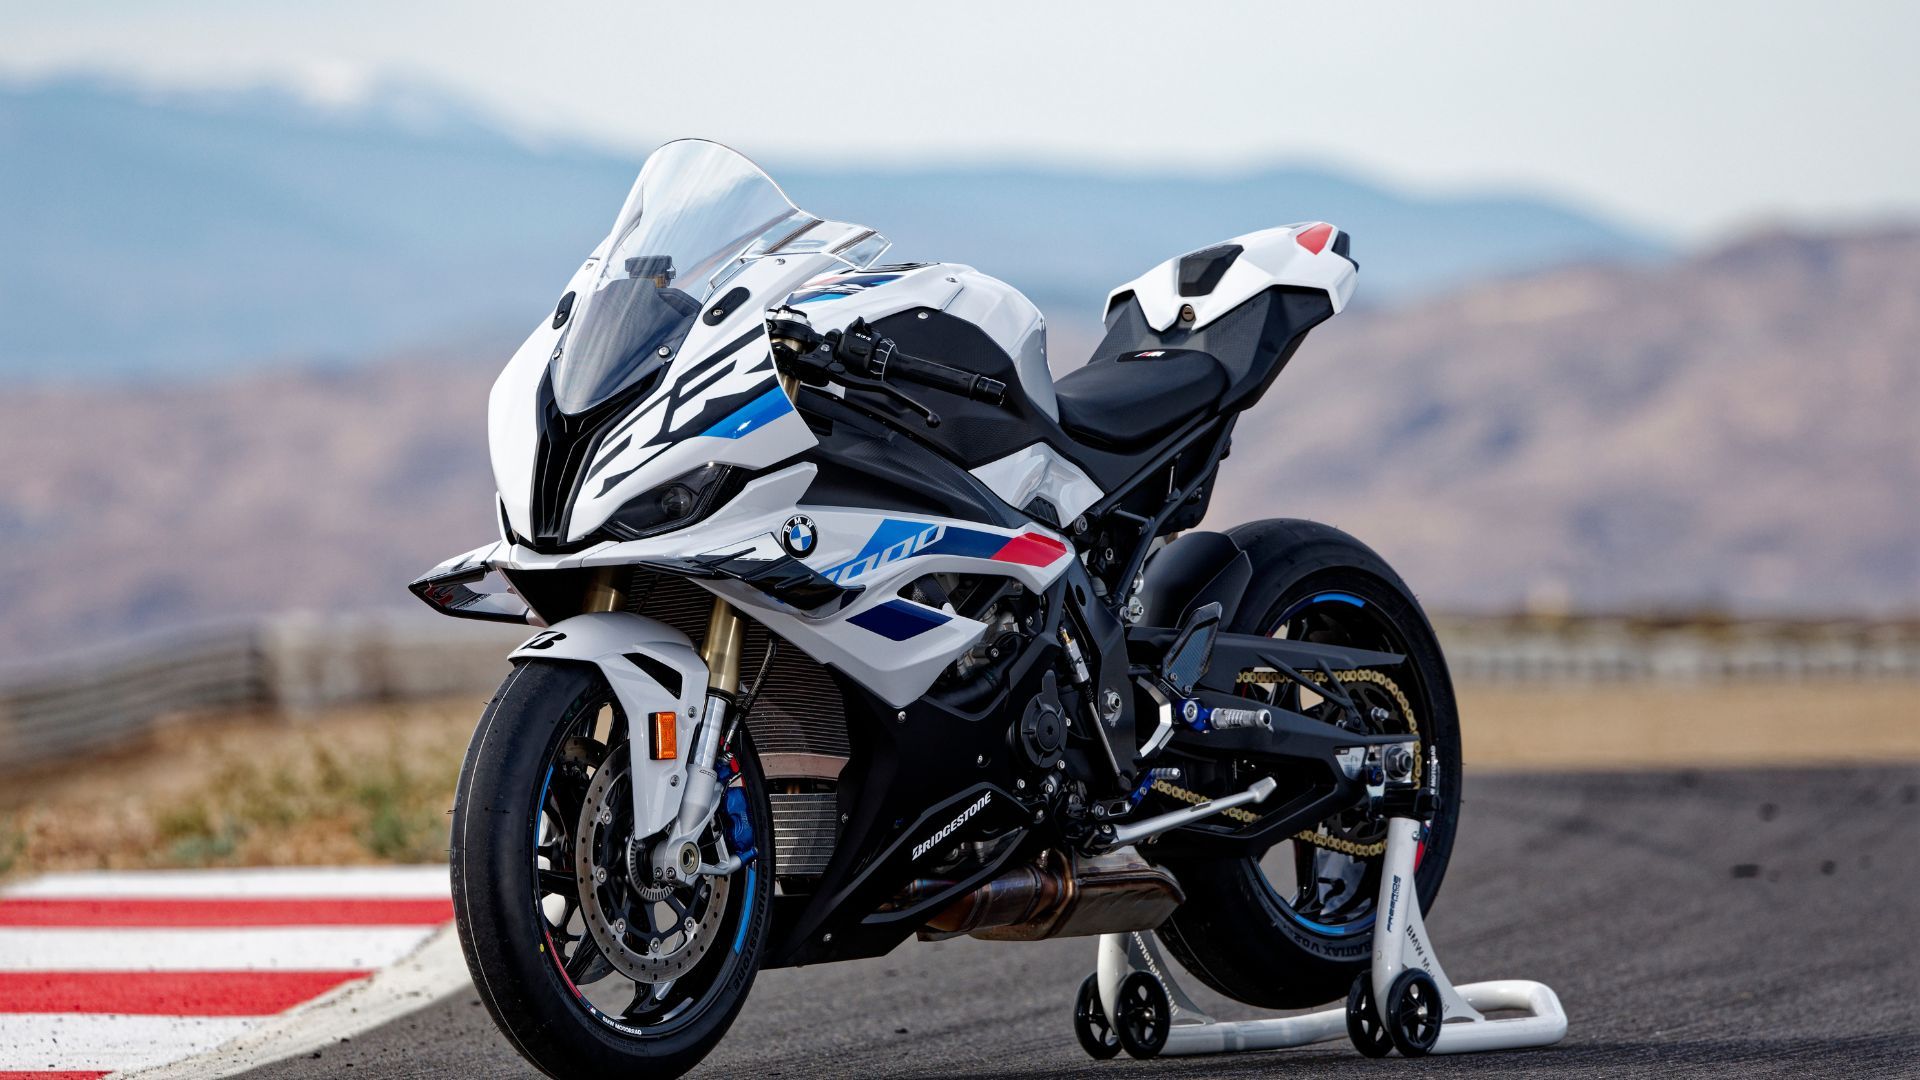 White BMW S 1000 RR motorcycle